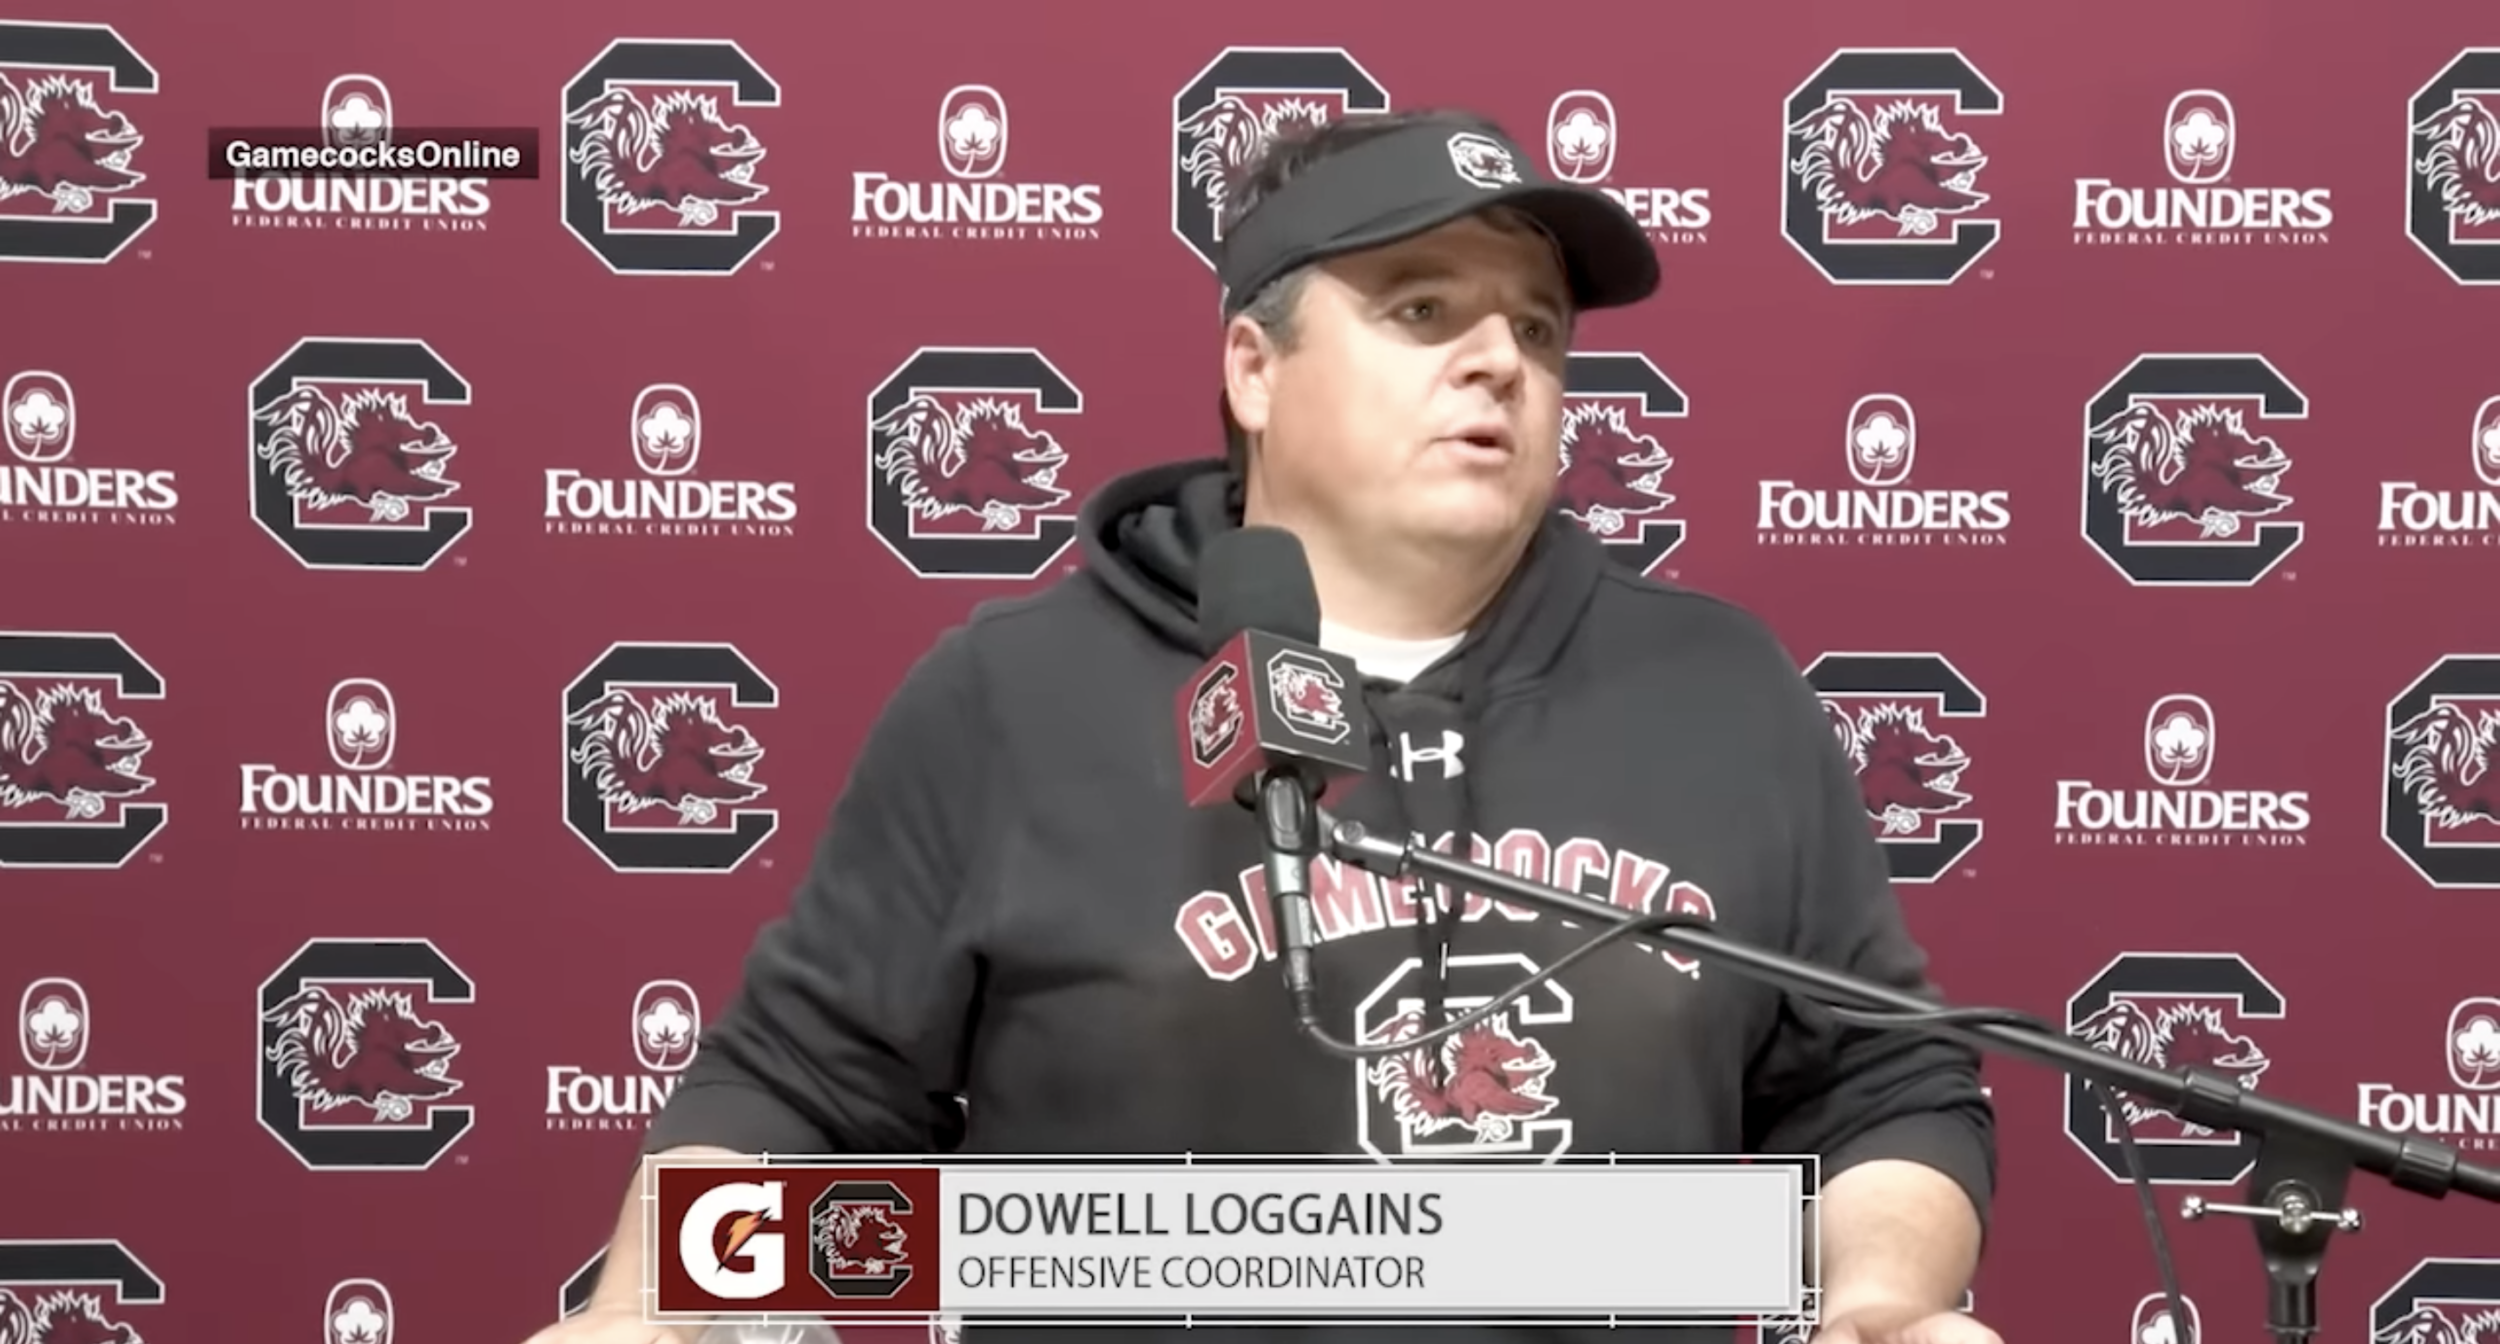 Dowell Loggains News Conference